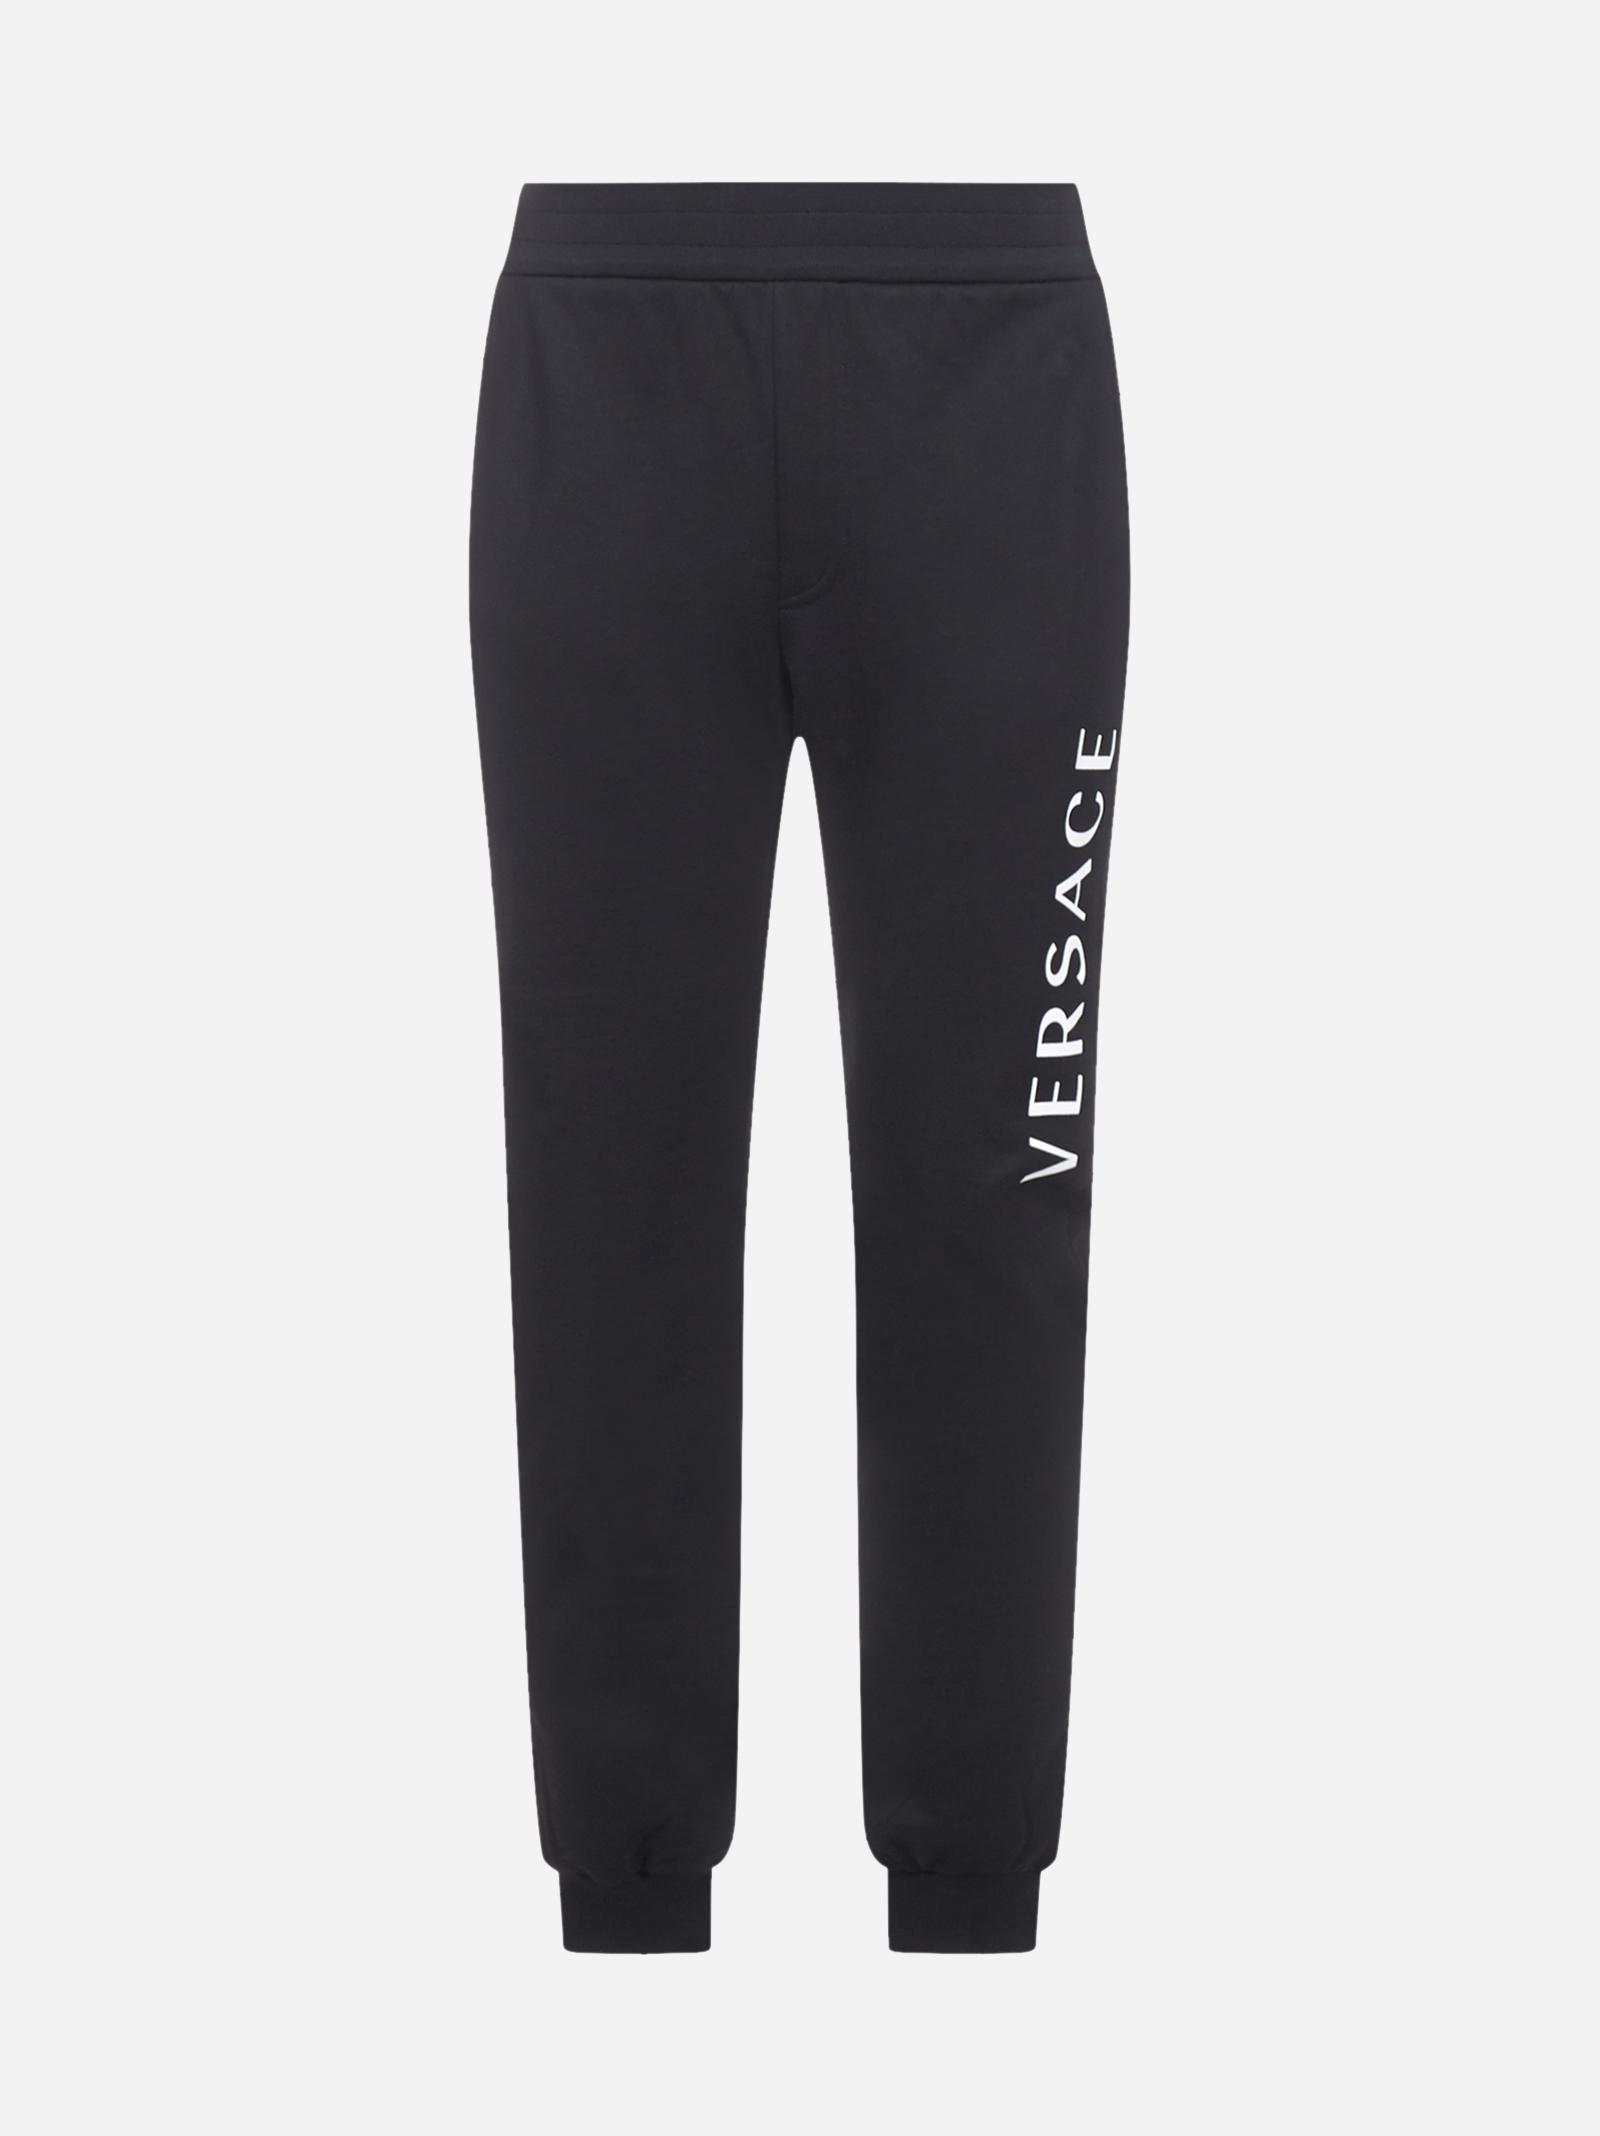 Versace Logo And Medusa Cotton Track Pants in Blue for Men - Lyst